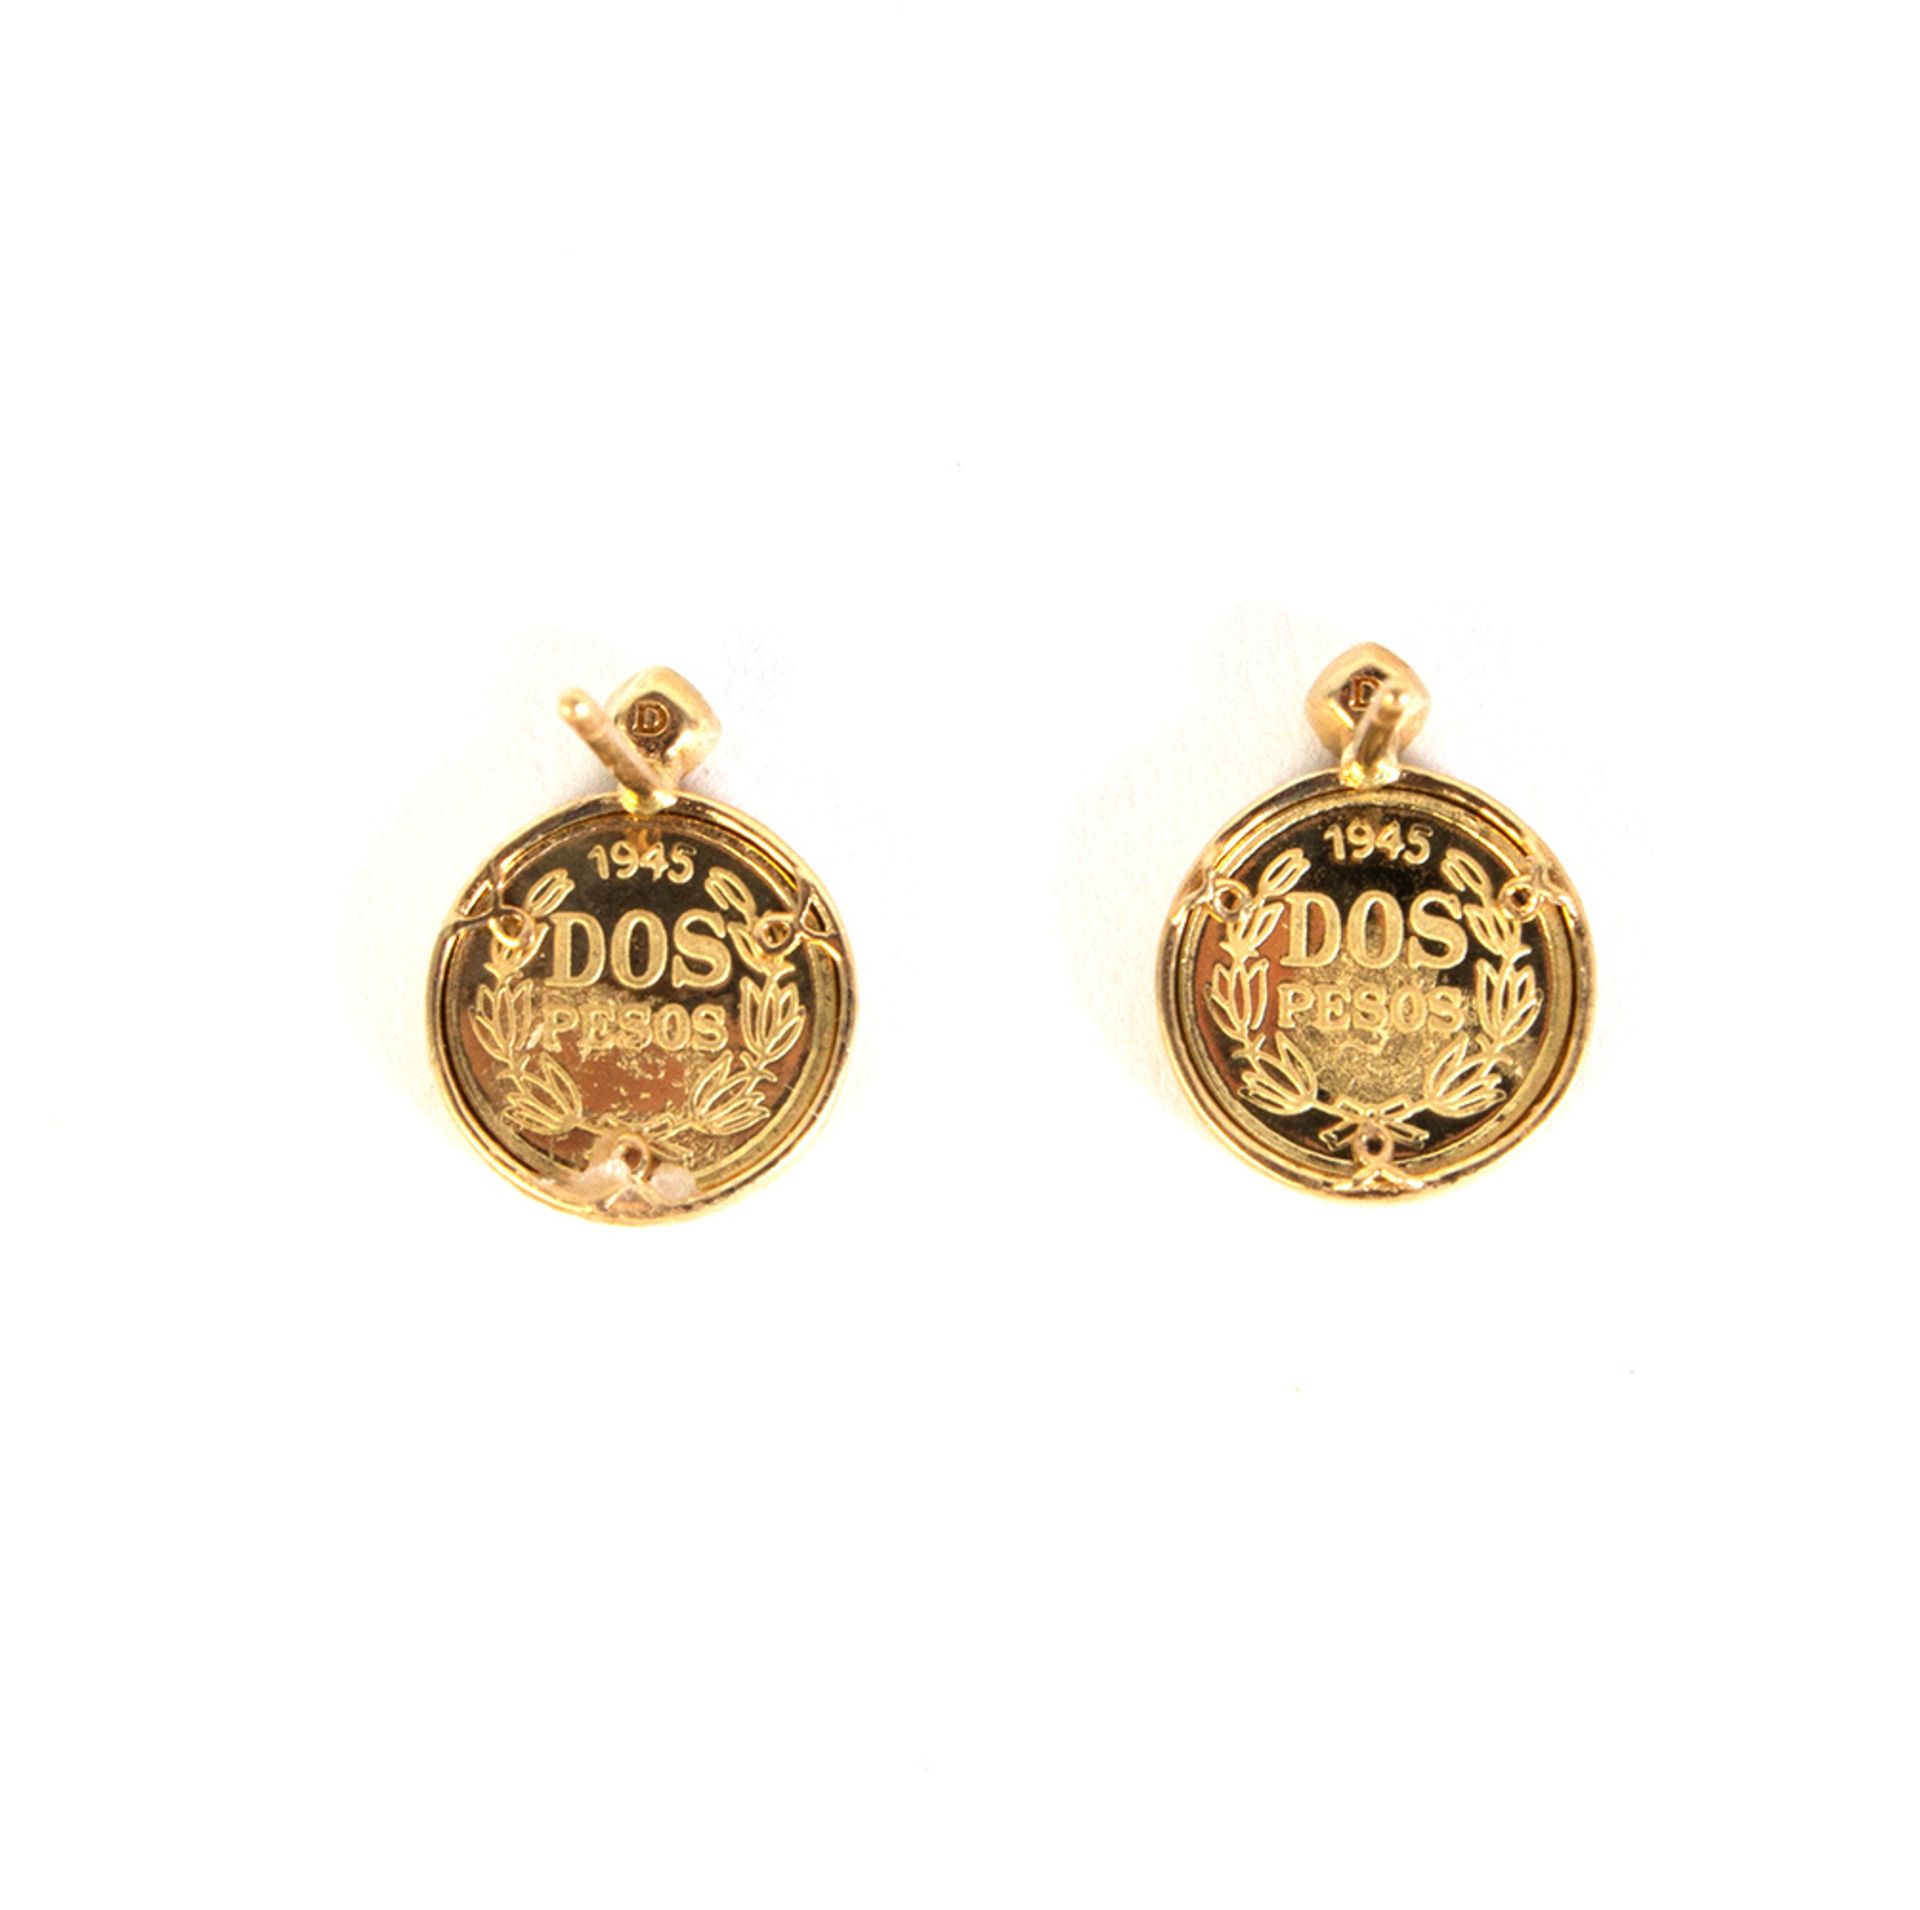 Gold earrings with reproduction of two-peso coins and diamonds, brilliant cut. - Image 2 of 2